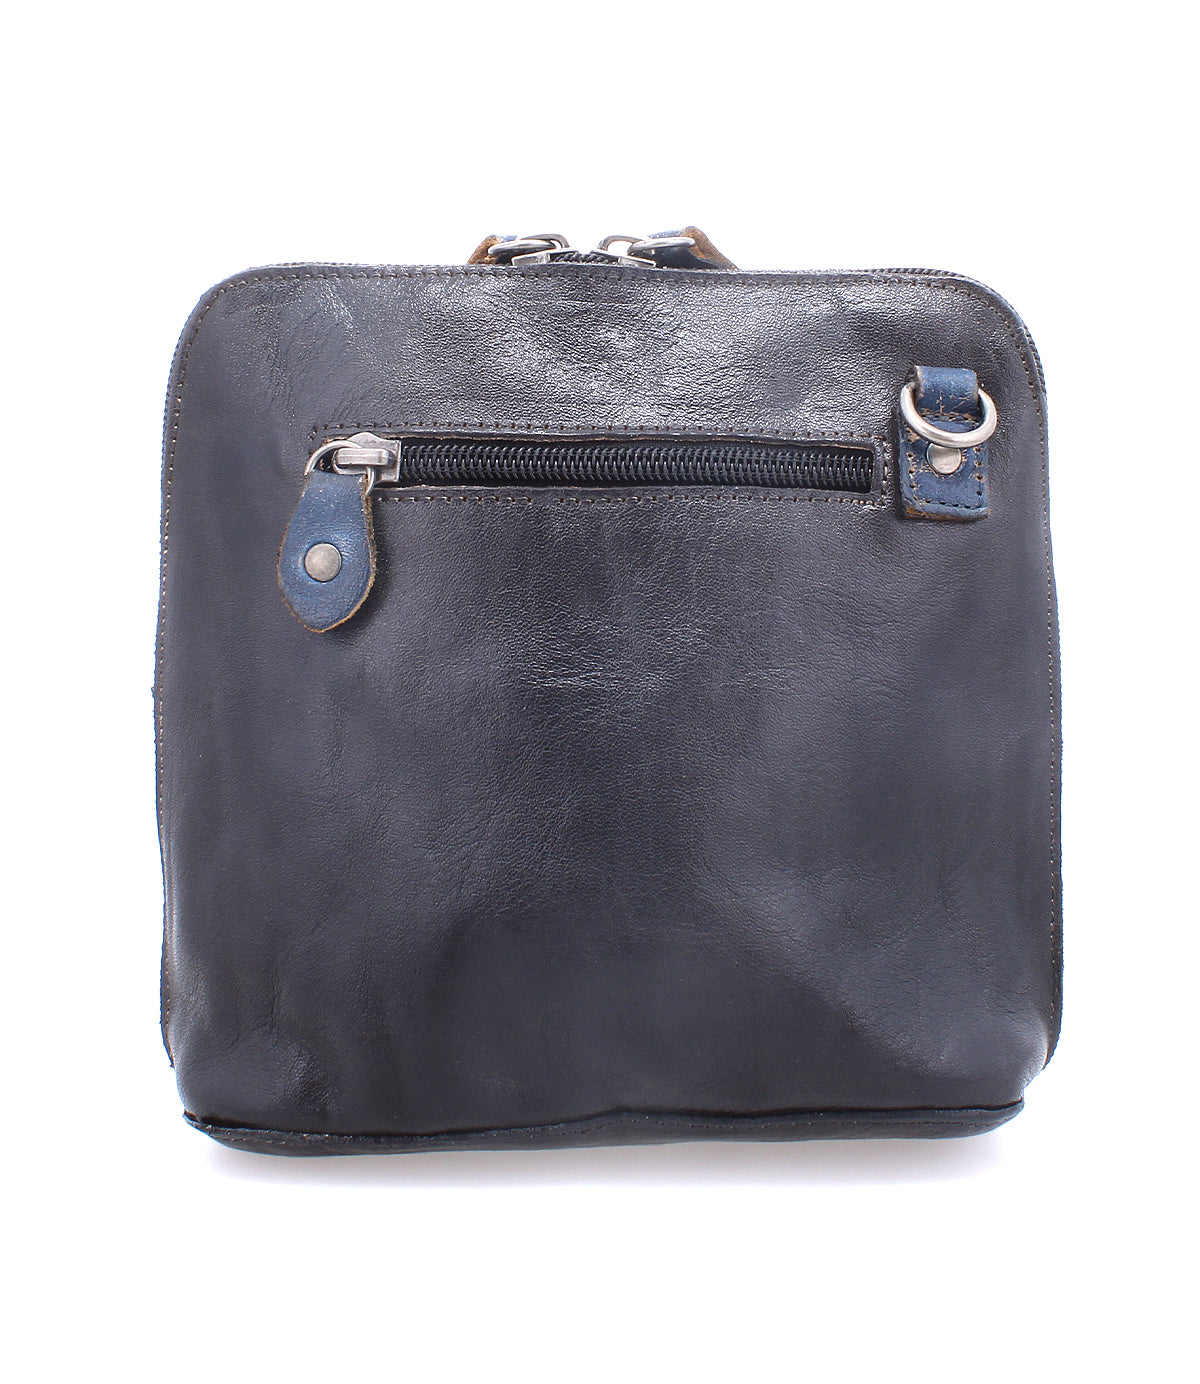 An image of a black leather Ventura gem bag by Bed Stu with a zipper.